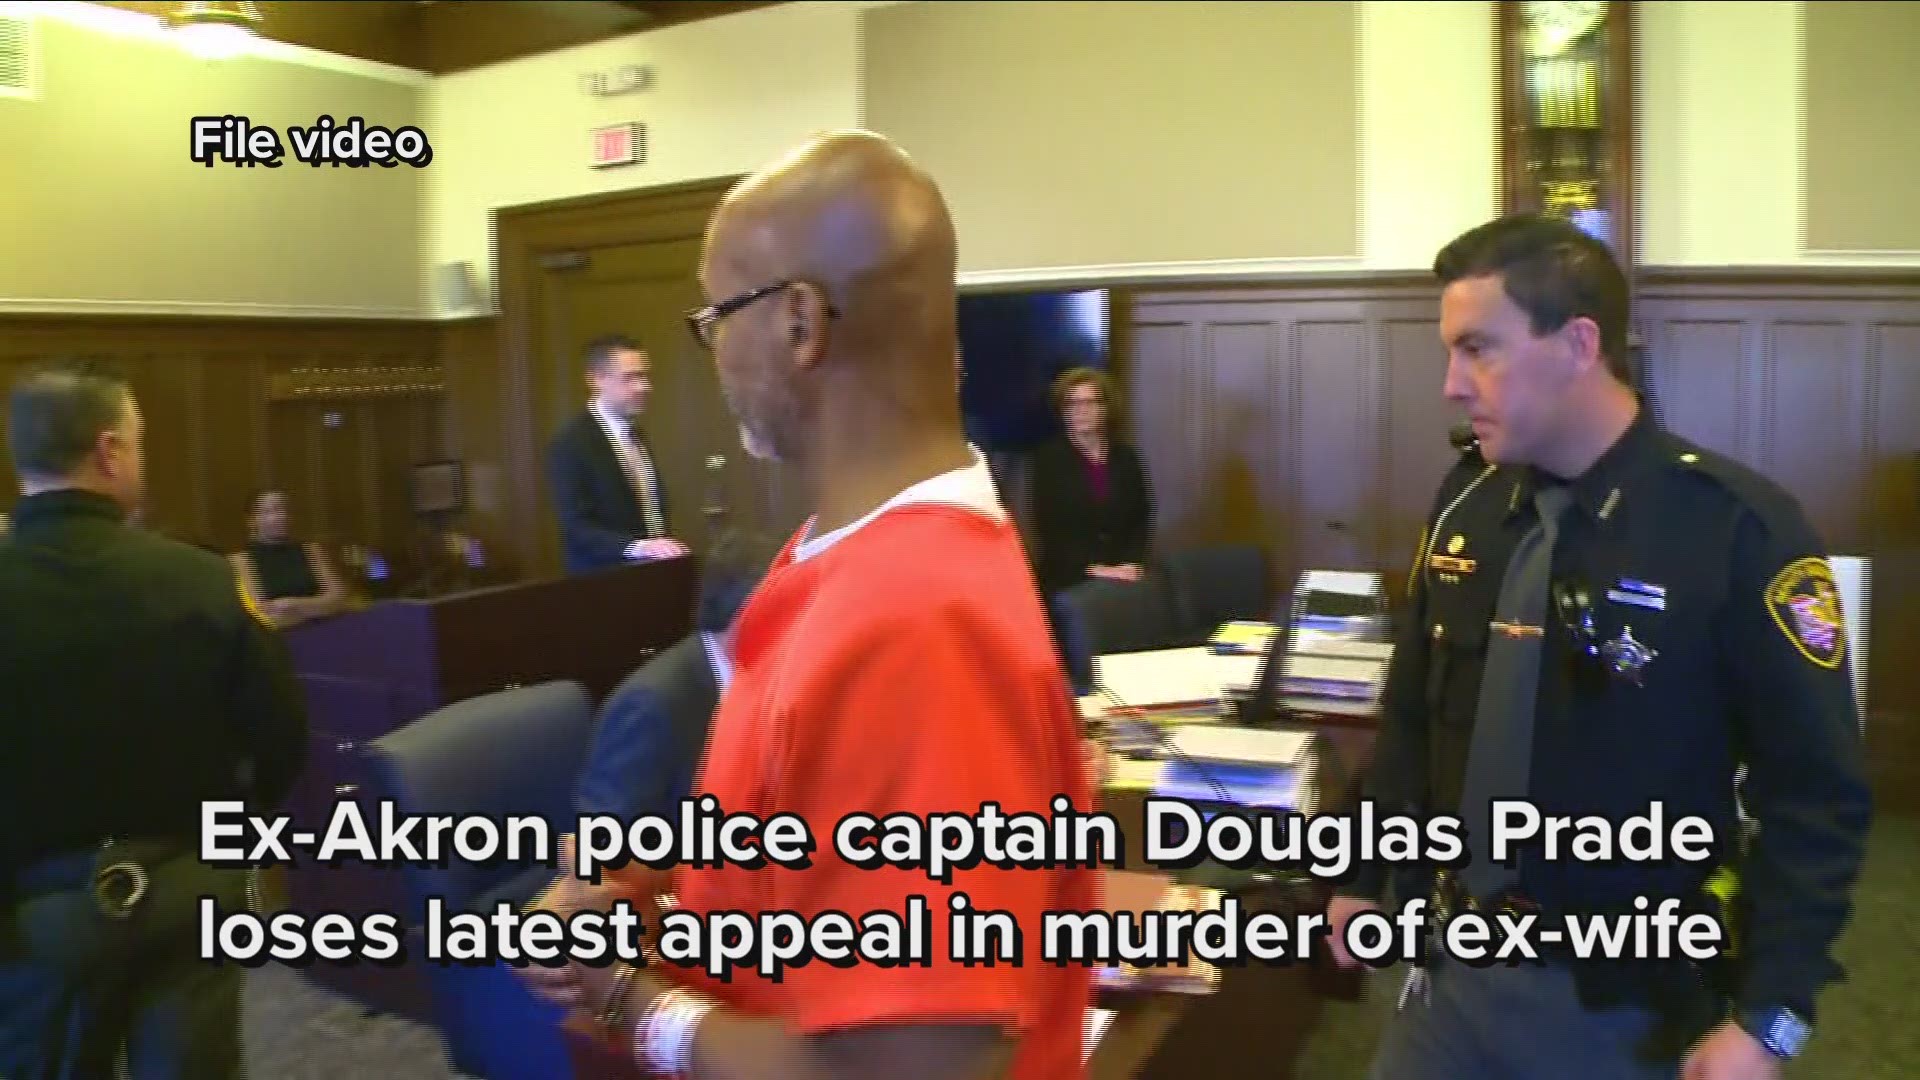 Ex-Akron police captain Douglas Prade loses latest appeal in murder of ex-wife